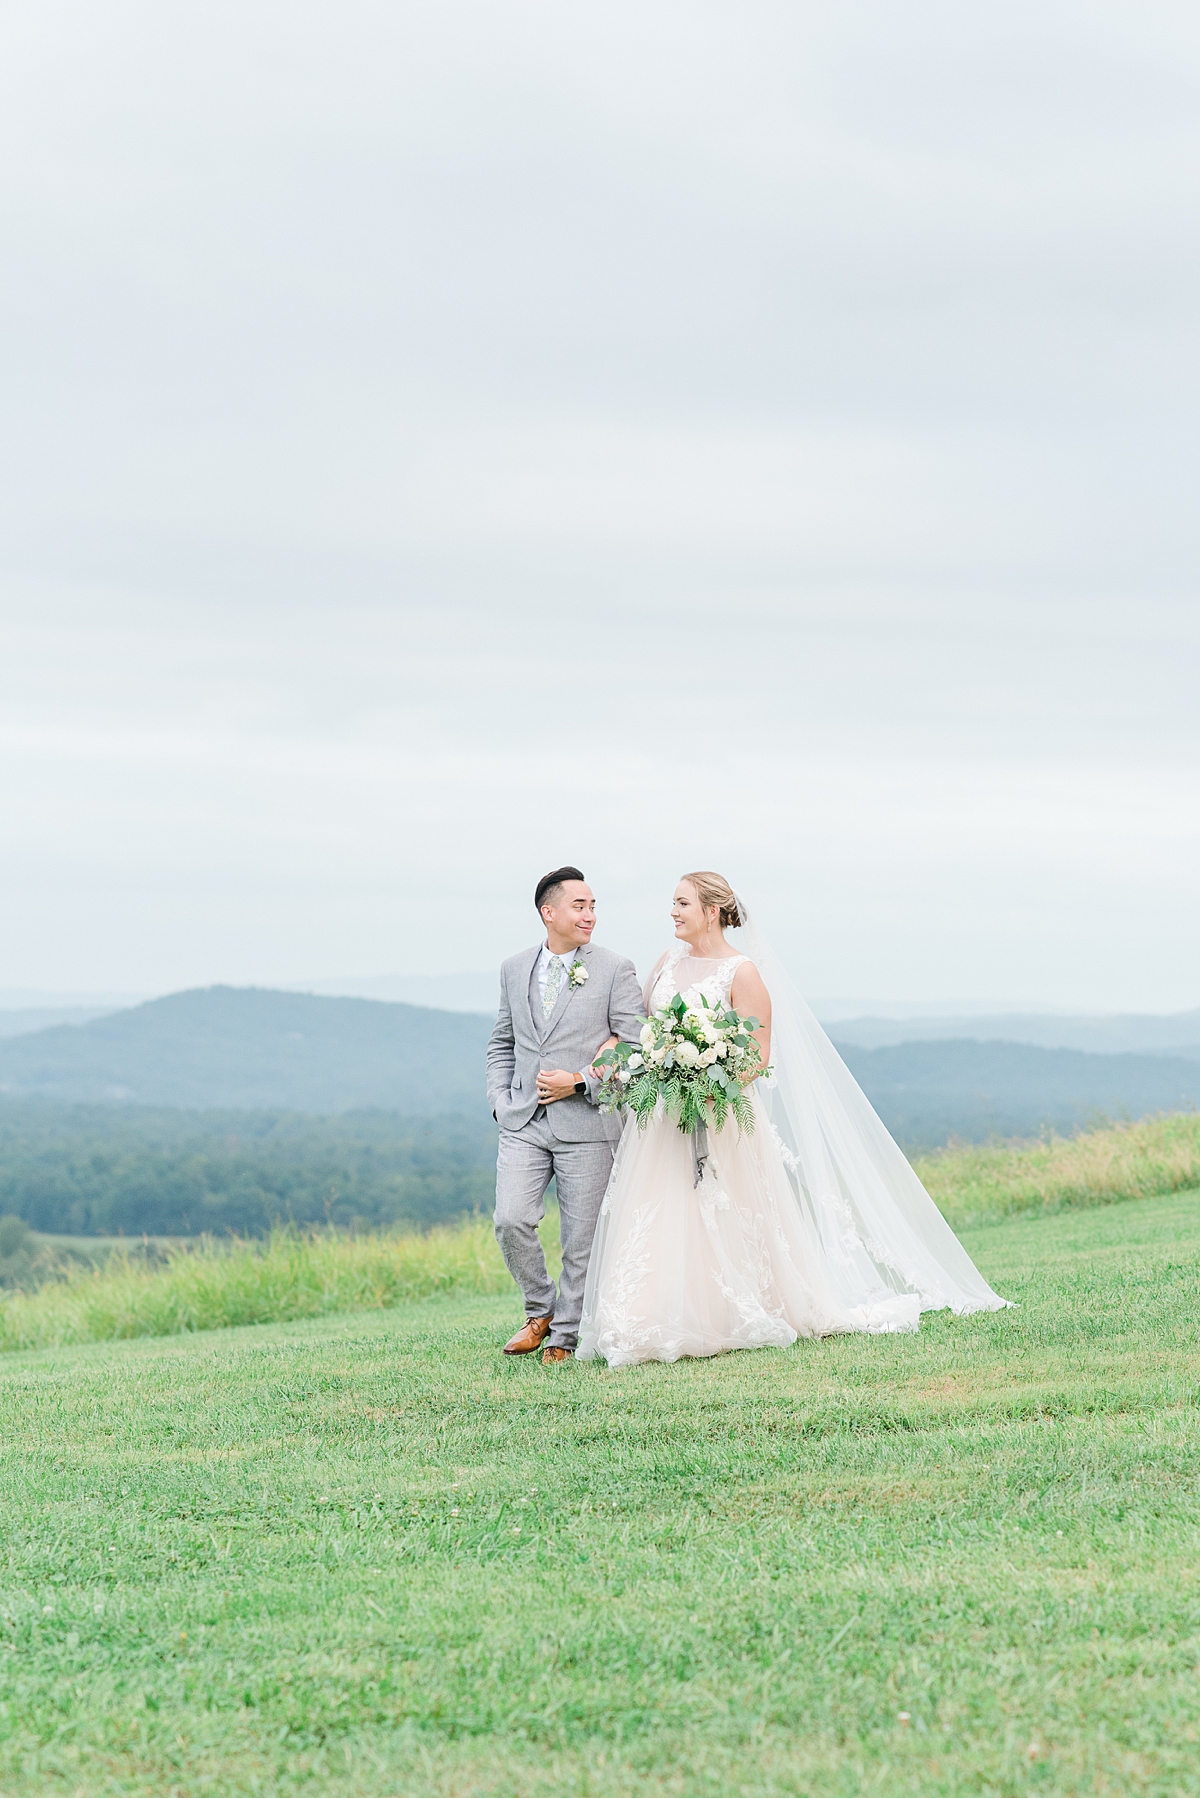 Bride and Groom Portraits with Mountain View at a Timeless Grace Estate Winery Wedding. Wedding Photography by Richmond Wedding Photographer Kailey Brianne Photography.